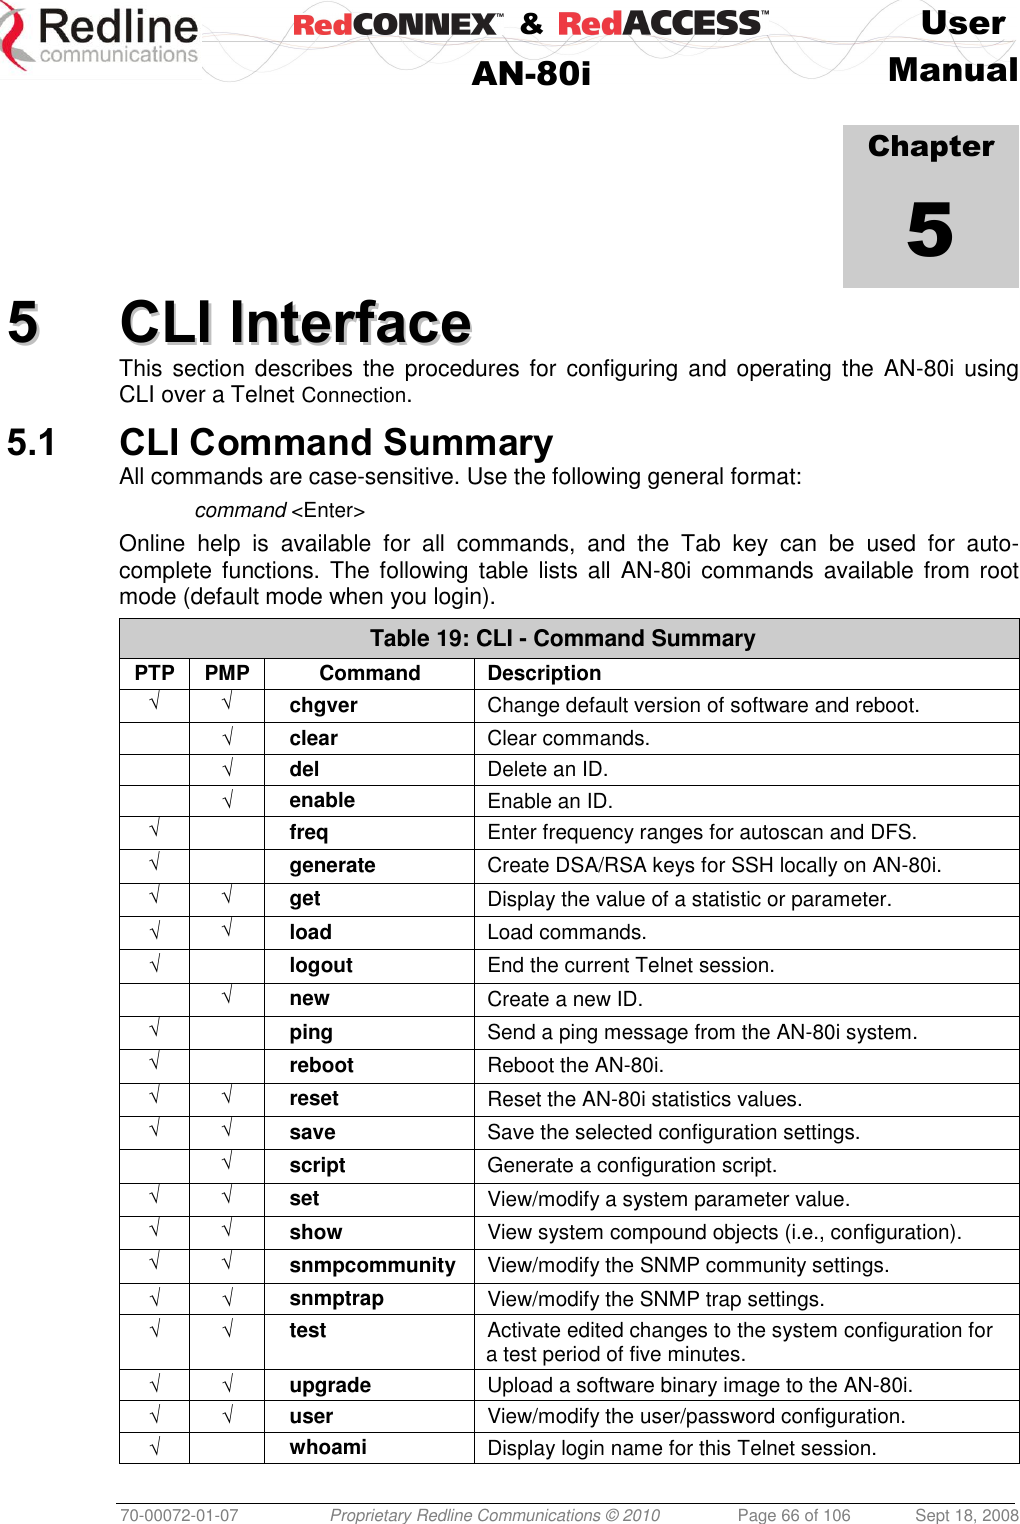    &amp;  User  AN-80i Manual  70-00072-01-07 Proprietary Redline Communications © 2010  Page 66 of 106  Sept 18, 2008             Chapter 5 55  CCLLII  IInntteerrffaaccee  This  section describes  the  procedures for configuring  and operating  the AN-80i  using CLI over a Telnet Connection. 5.1 CLI Command Summary All commands are case-sensitive. Use the following general format:  command &lt;Enter&gt; Online  help  is  available  for  all  commands,  and  the  Tab  key  can  be  used  for  auto-complete functions.  The  following table lists  all  AN-80i commands available from root mode (default mode when you login). Table 19: CLI - Command Summary PTP PMP Command Description √ √ chgver Change default version of software and reboot.  √ clear Clear commands.  √ del Delete an ID.  √ enable Enable an ID. √  freq Enter frequency ranges for autoscan and DFS. √  generate Create DSA/RSA keys for SSH locally on AN-80i. √ √ get Display the value of a statistic or parameter.  √ √ load Load commands. √  logout End the current Telnet session.  √ new Create a new ID. √  ping Send a ping message from the AN-80i system. √  reboot Reboot the AN-80i. √ √ reset Reset the AN-80i statistics values. √ √ save Save the selected configuration settings.  √ script Generate a configuration script. √ √ set View/modify a system parameter value. √ √ show View system compound objects (i.e., configuration). √ √ snmpcommunity View/modify the SNMP community settings. √ √ snmptrap View/modify the SNMP trap settings. √ √ test Activate edited changes to the system configuration for a test period of five minutes. √ √ upgrade Upload a software binary image to the AN-80i. √ √ user View/modify the user/password configuration. √  whoami Display login name for this Telnet session.  